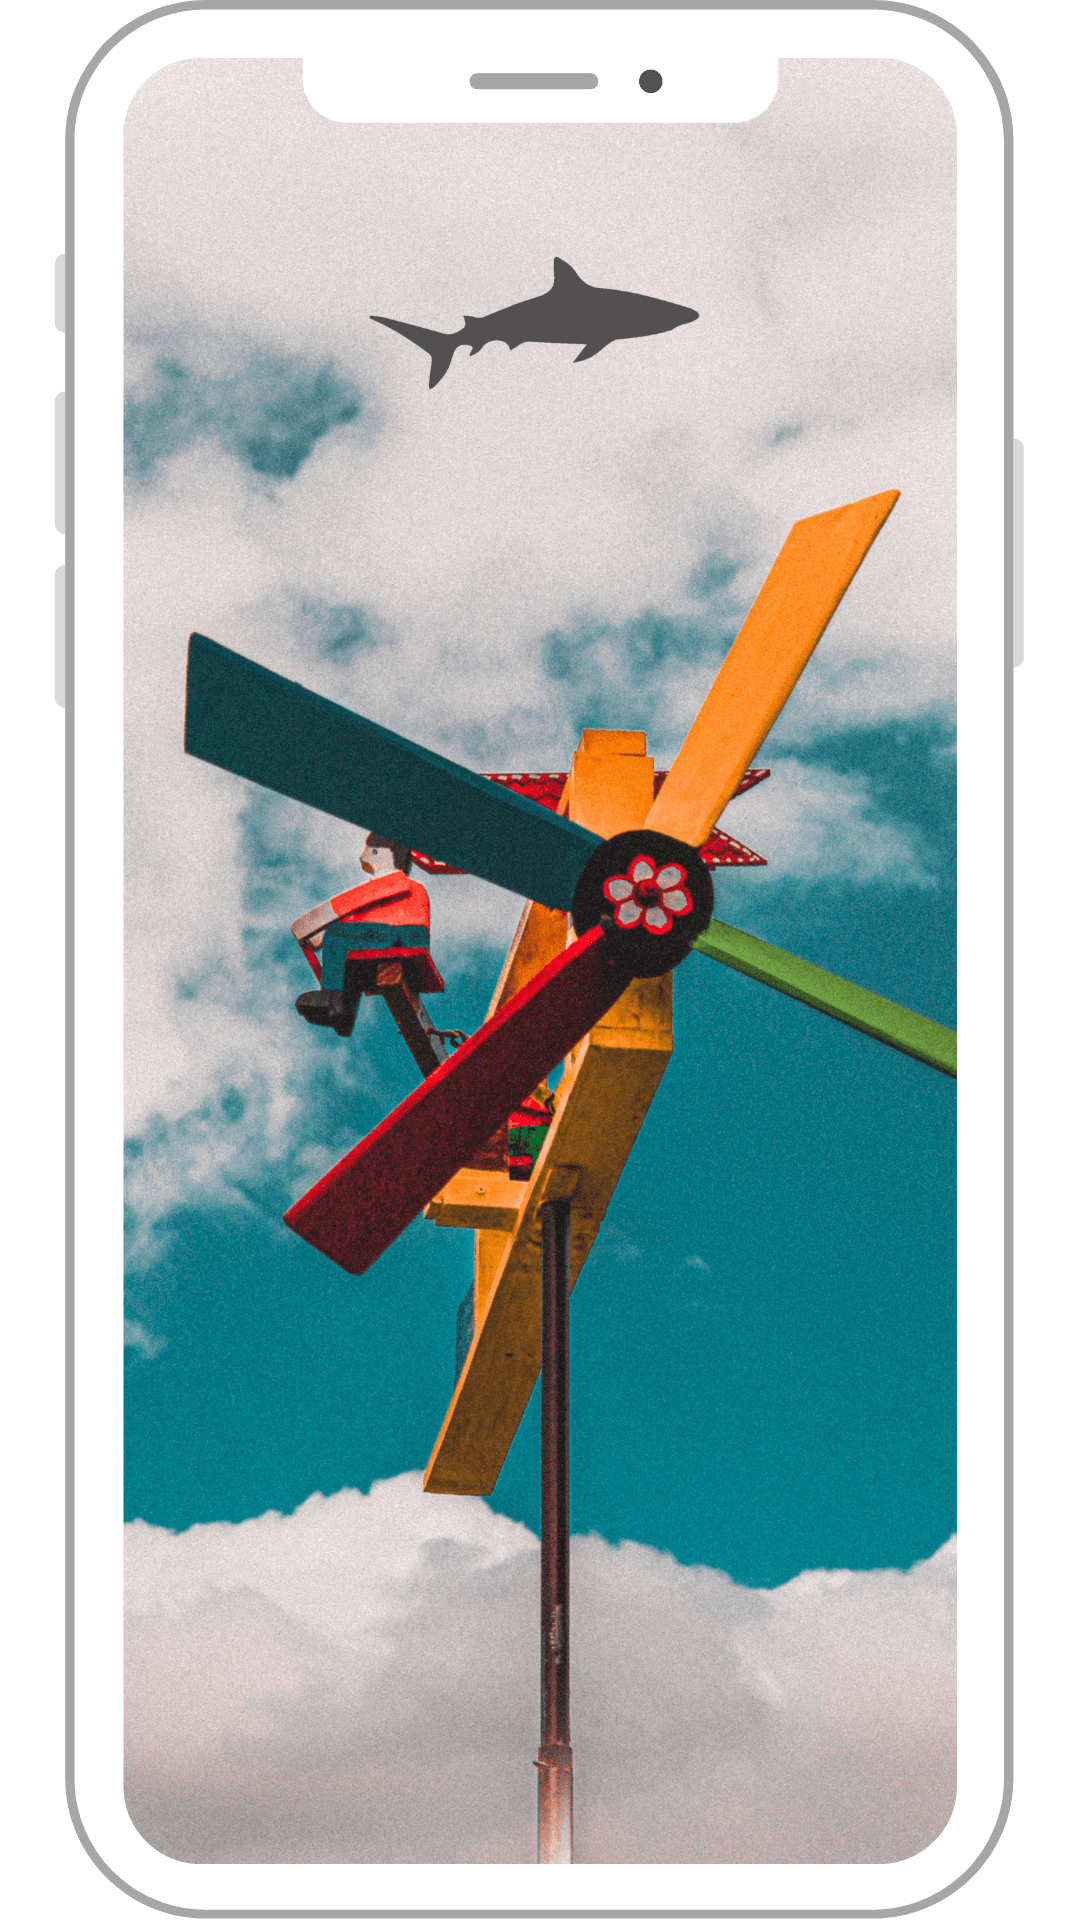 A phone with a picture of a windmill and a shark in the sky